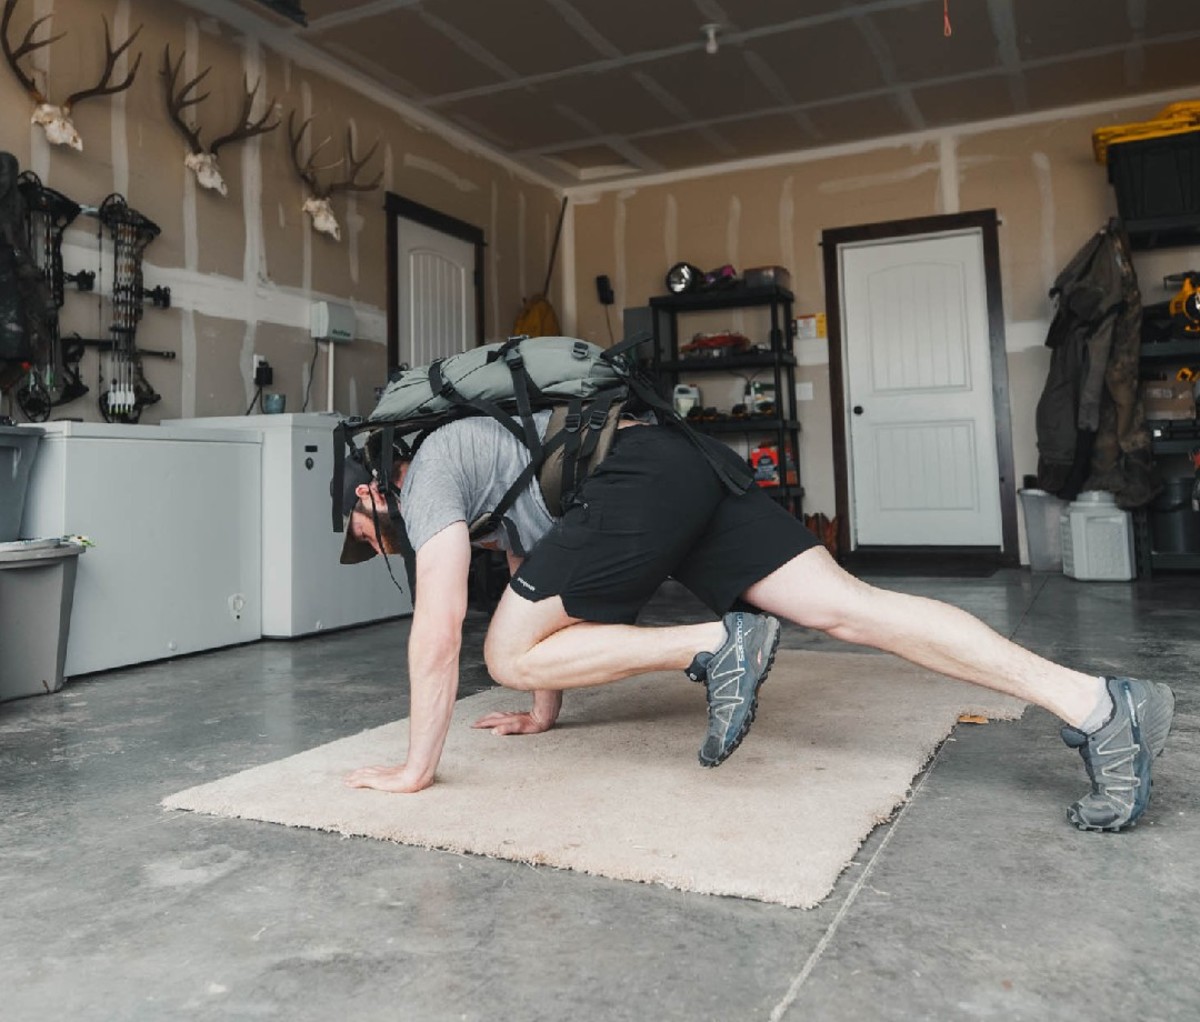 Guy exercising in garage with backpack in forward stretch position.